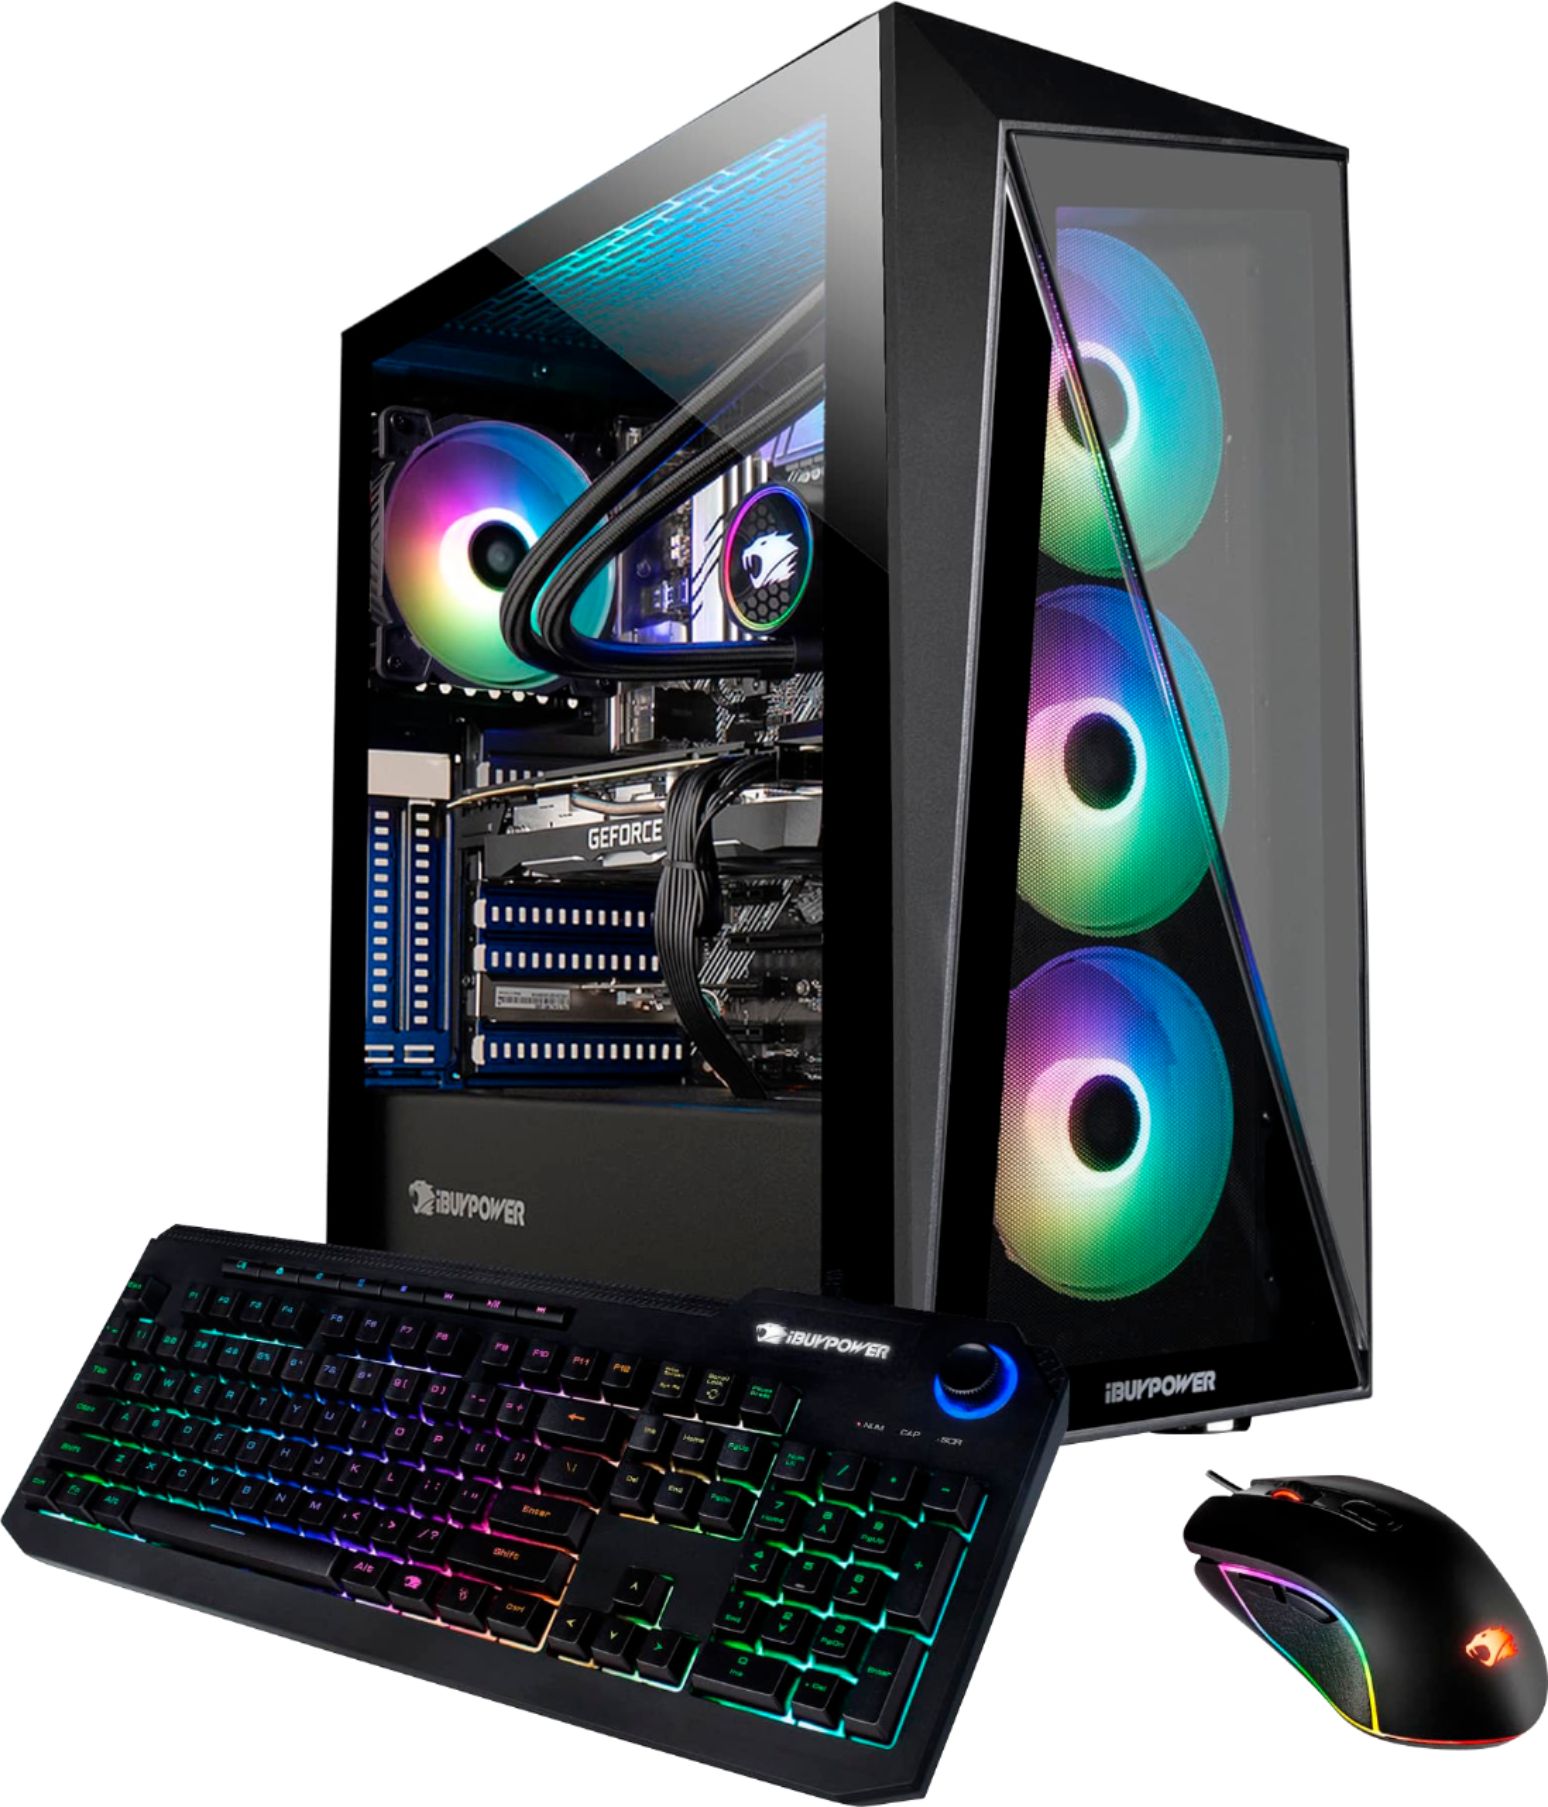 Simple Is The Ibuypower Gaming Pc Good for Streaming